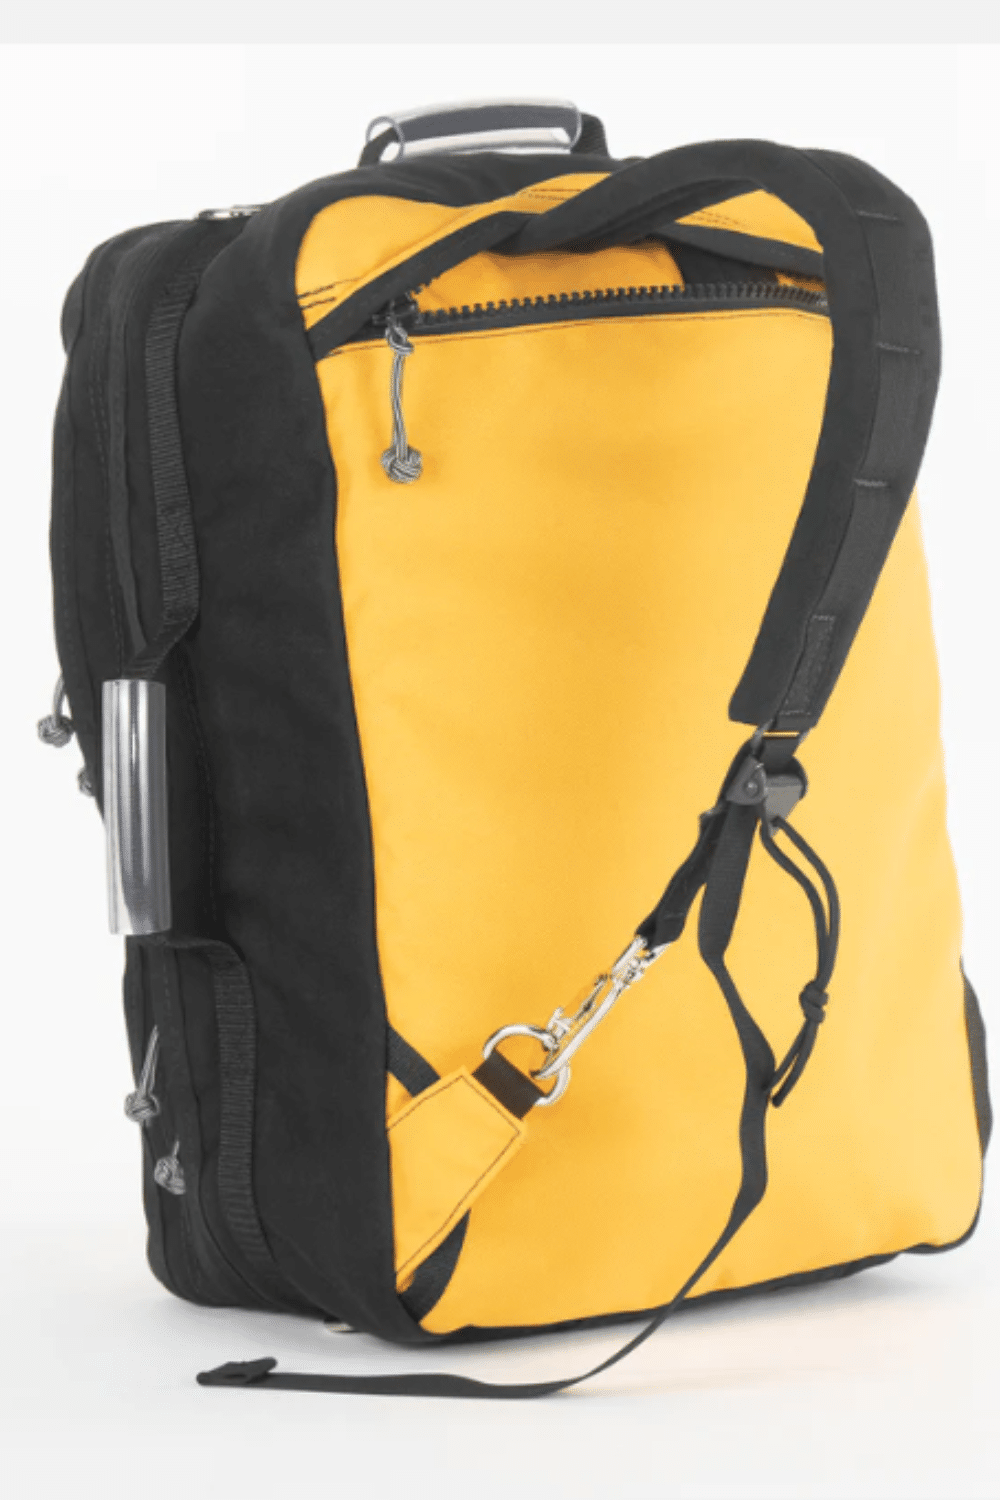 The Italy Travel bag for Pittsburgh black and Yellow